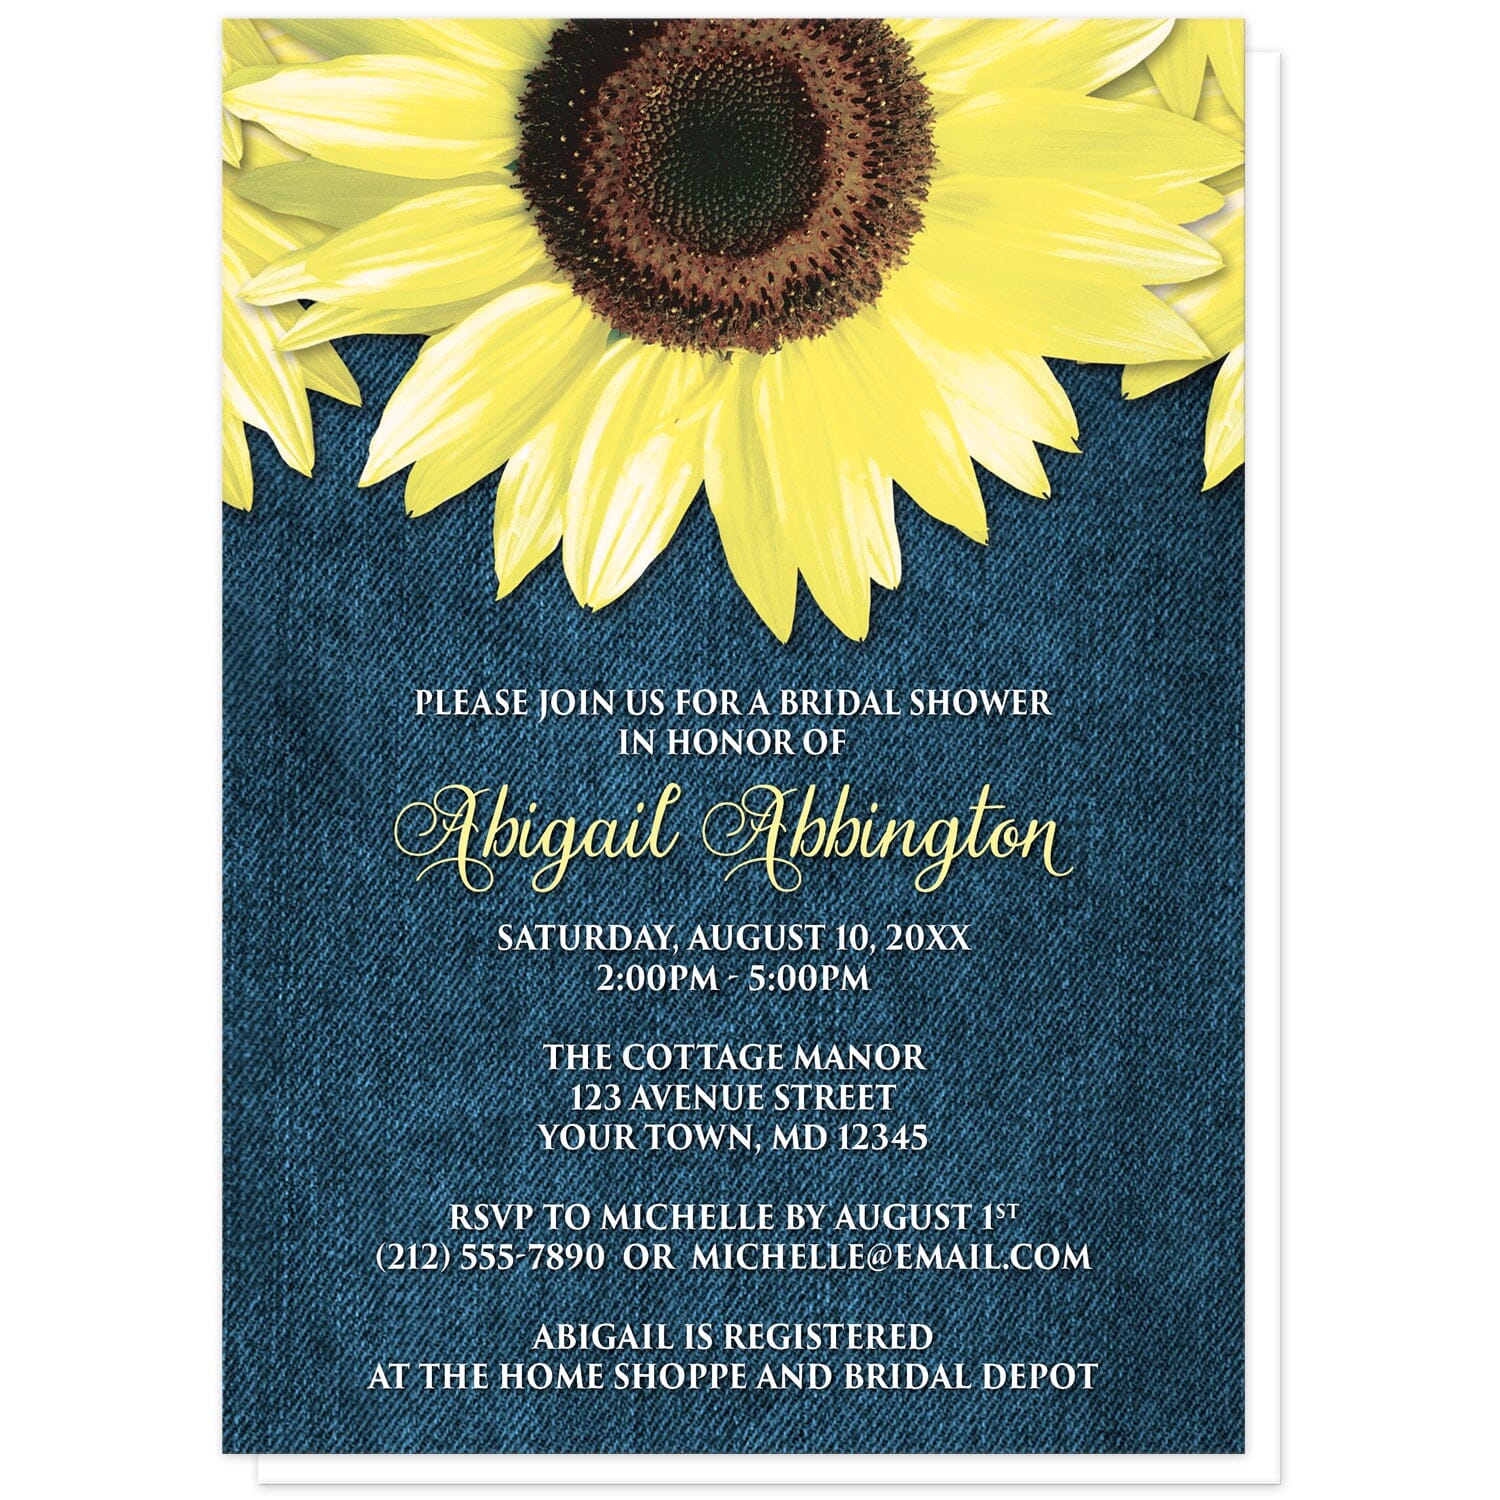 Rustic Sunflower and Denim Bridal Shower Invitations at Artistically Invited. Southern-inspired rustic sunflower and denim bridal shower invitations designed with large yellow sunflowers along the top over a country blue denim design. Your personalized bridal shower celebration details are custom printed in yellow and white over the blue denim background below the pretty sunflowers. 